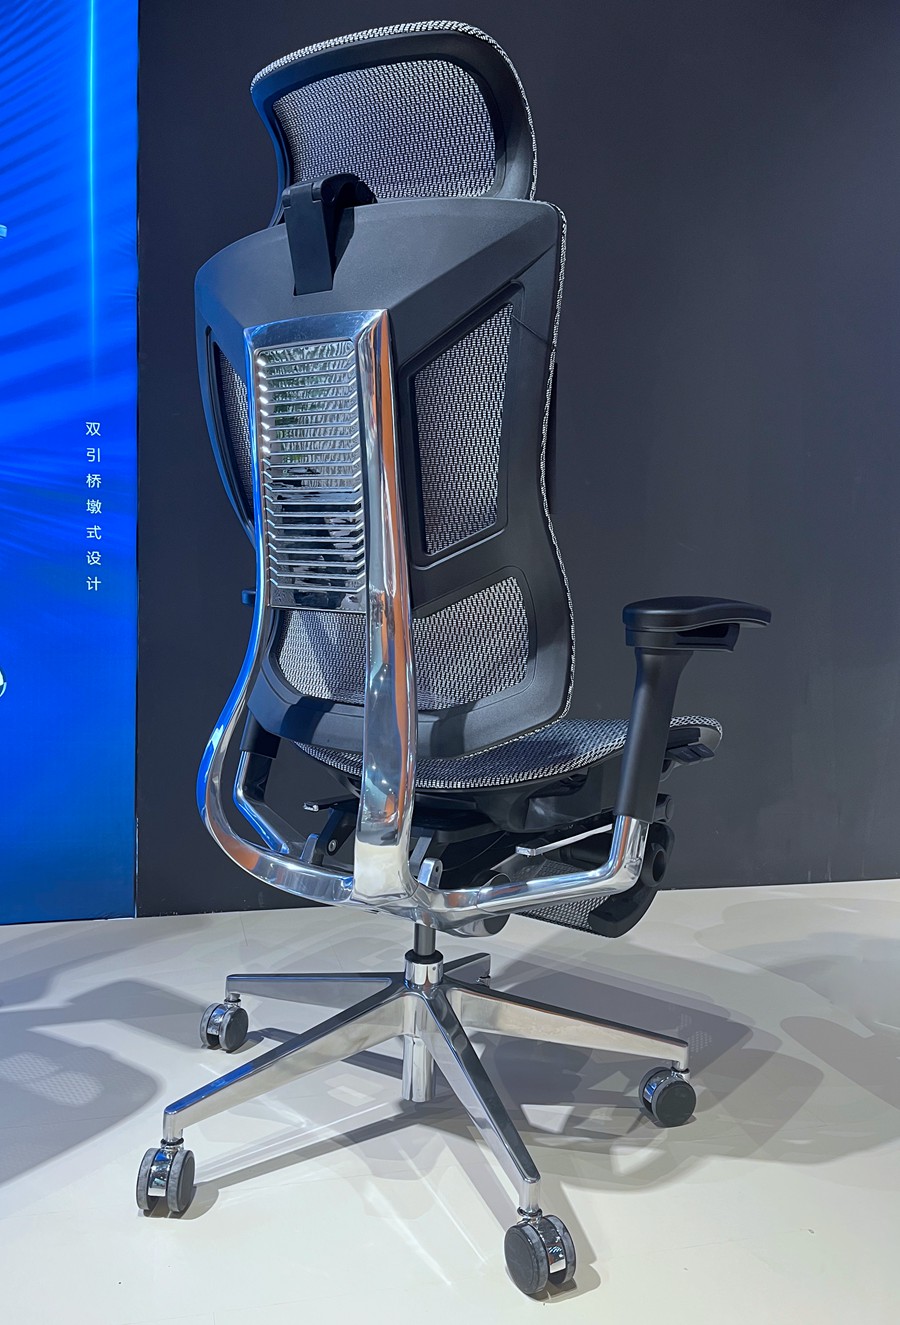 Four Important Design Points of Ergonomic Chairs